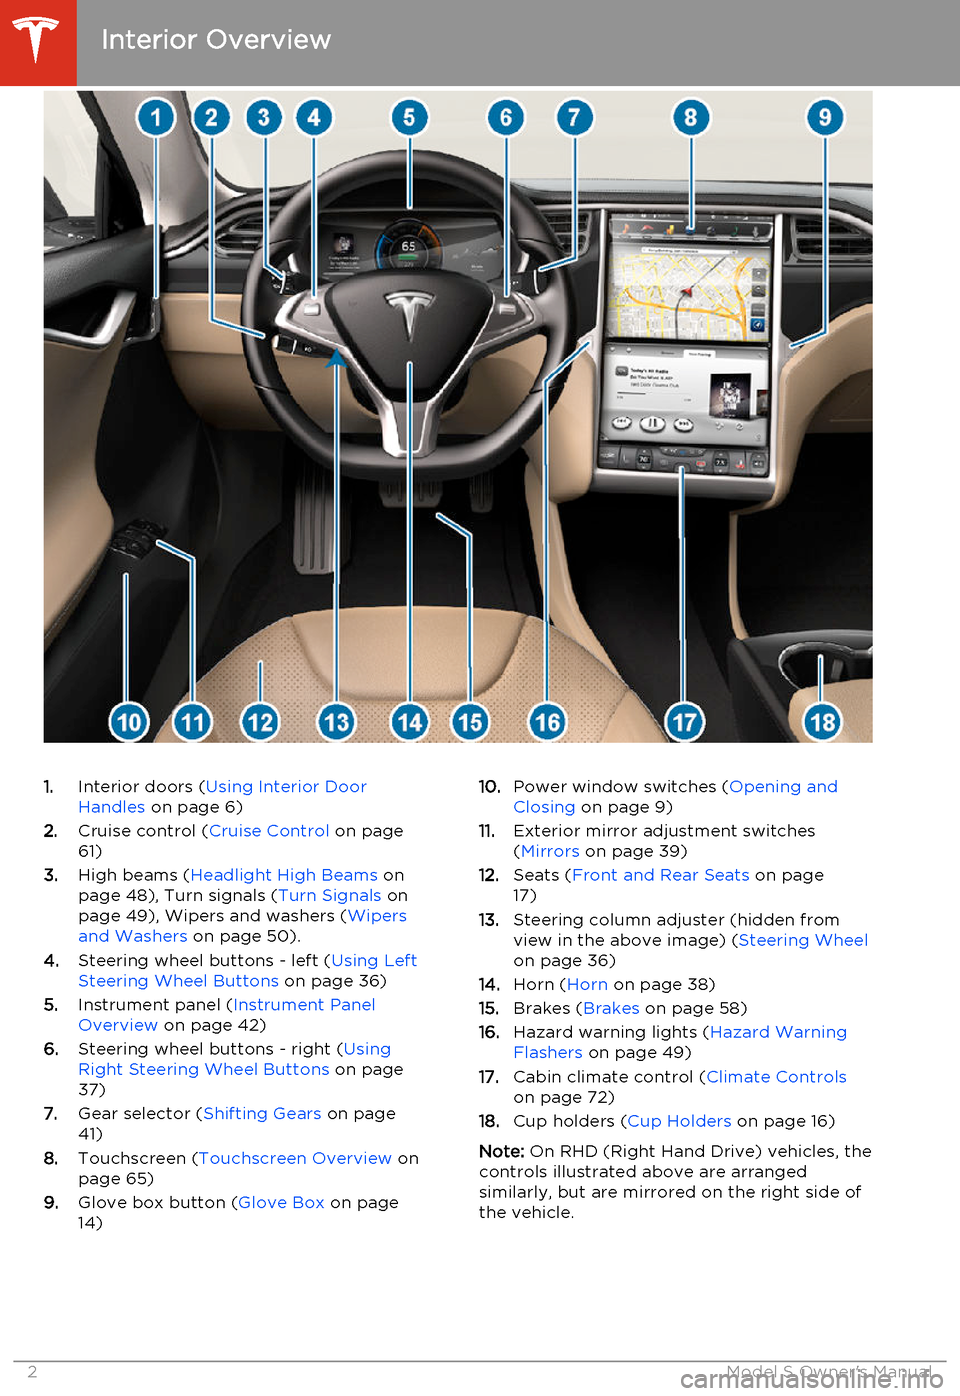 TESLA MODEL S 2014  Owners manual (North America) 1.Interior doors ( Using Interior Door
Handles  on page 6)
2. Cruise control ( Cruise Control on page
61)
3. High beams ( Headlight High Beams  on
page 48), Turn signals ( Turn Signals on
page 49), Wi